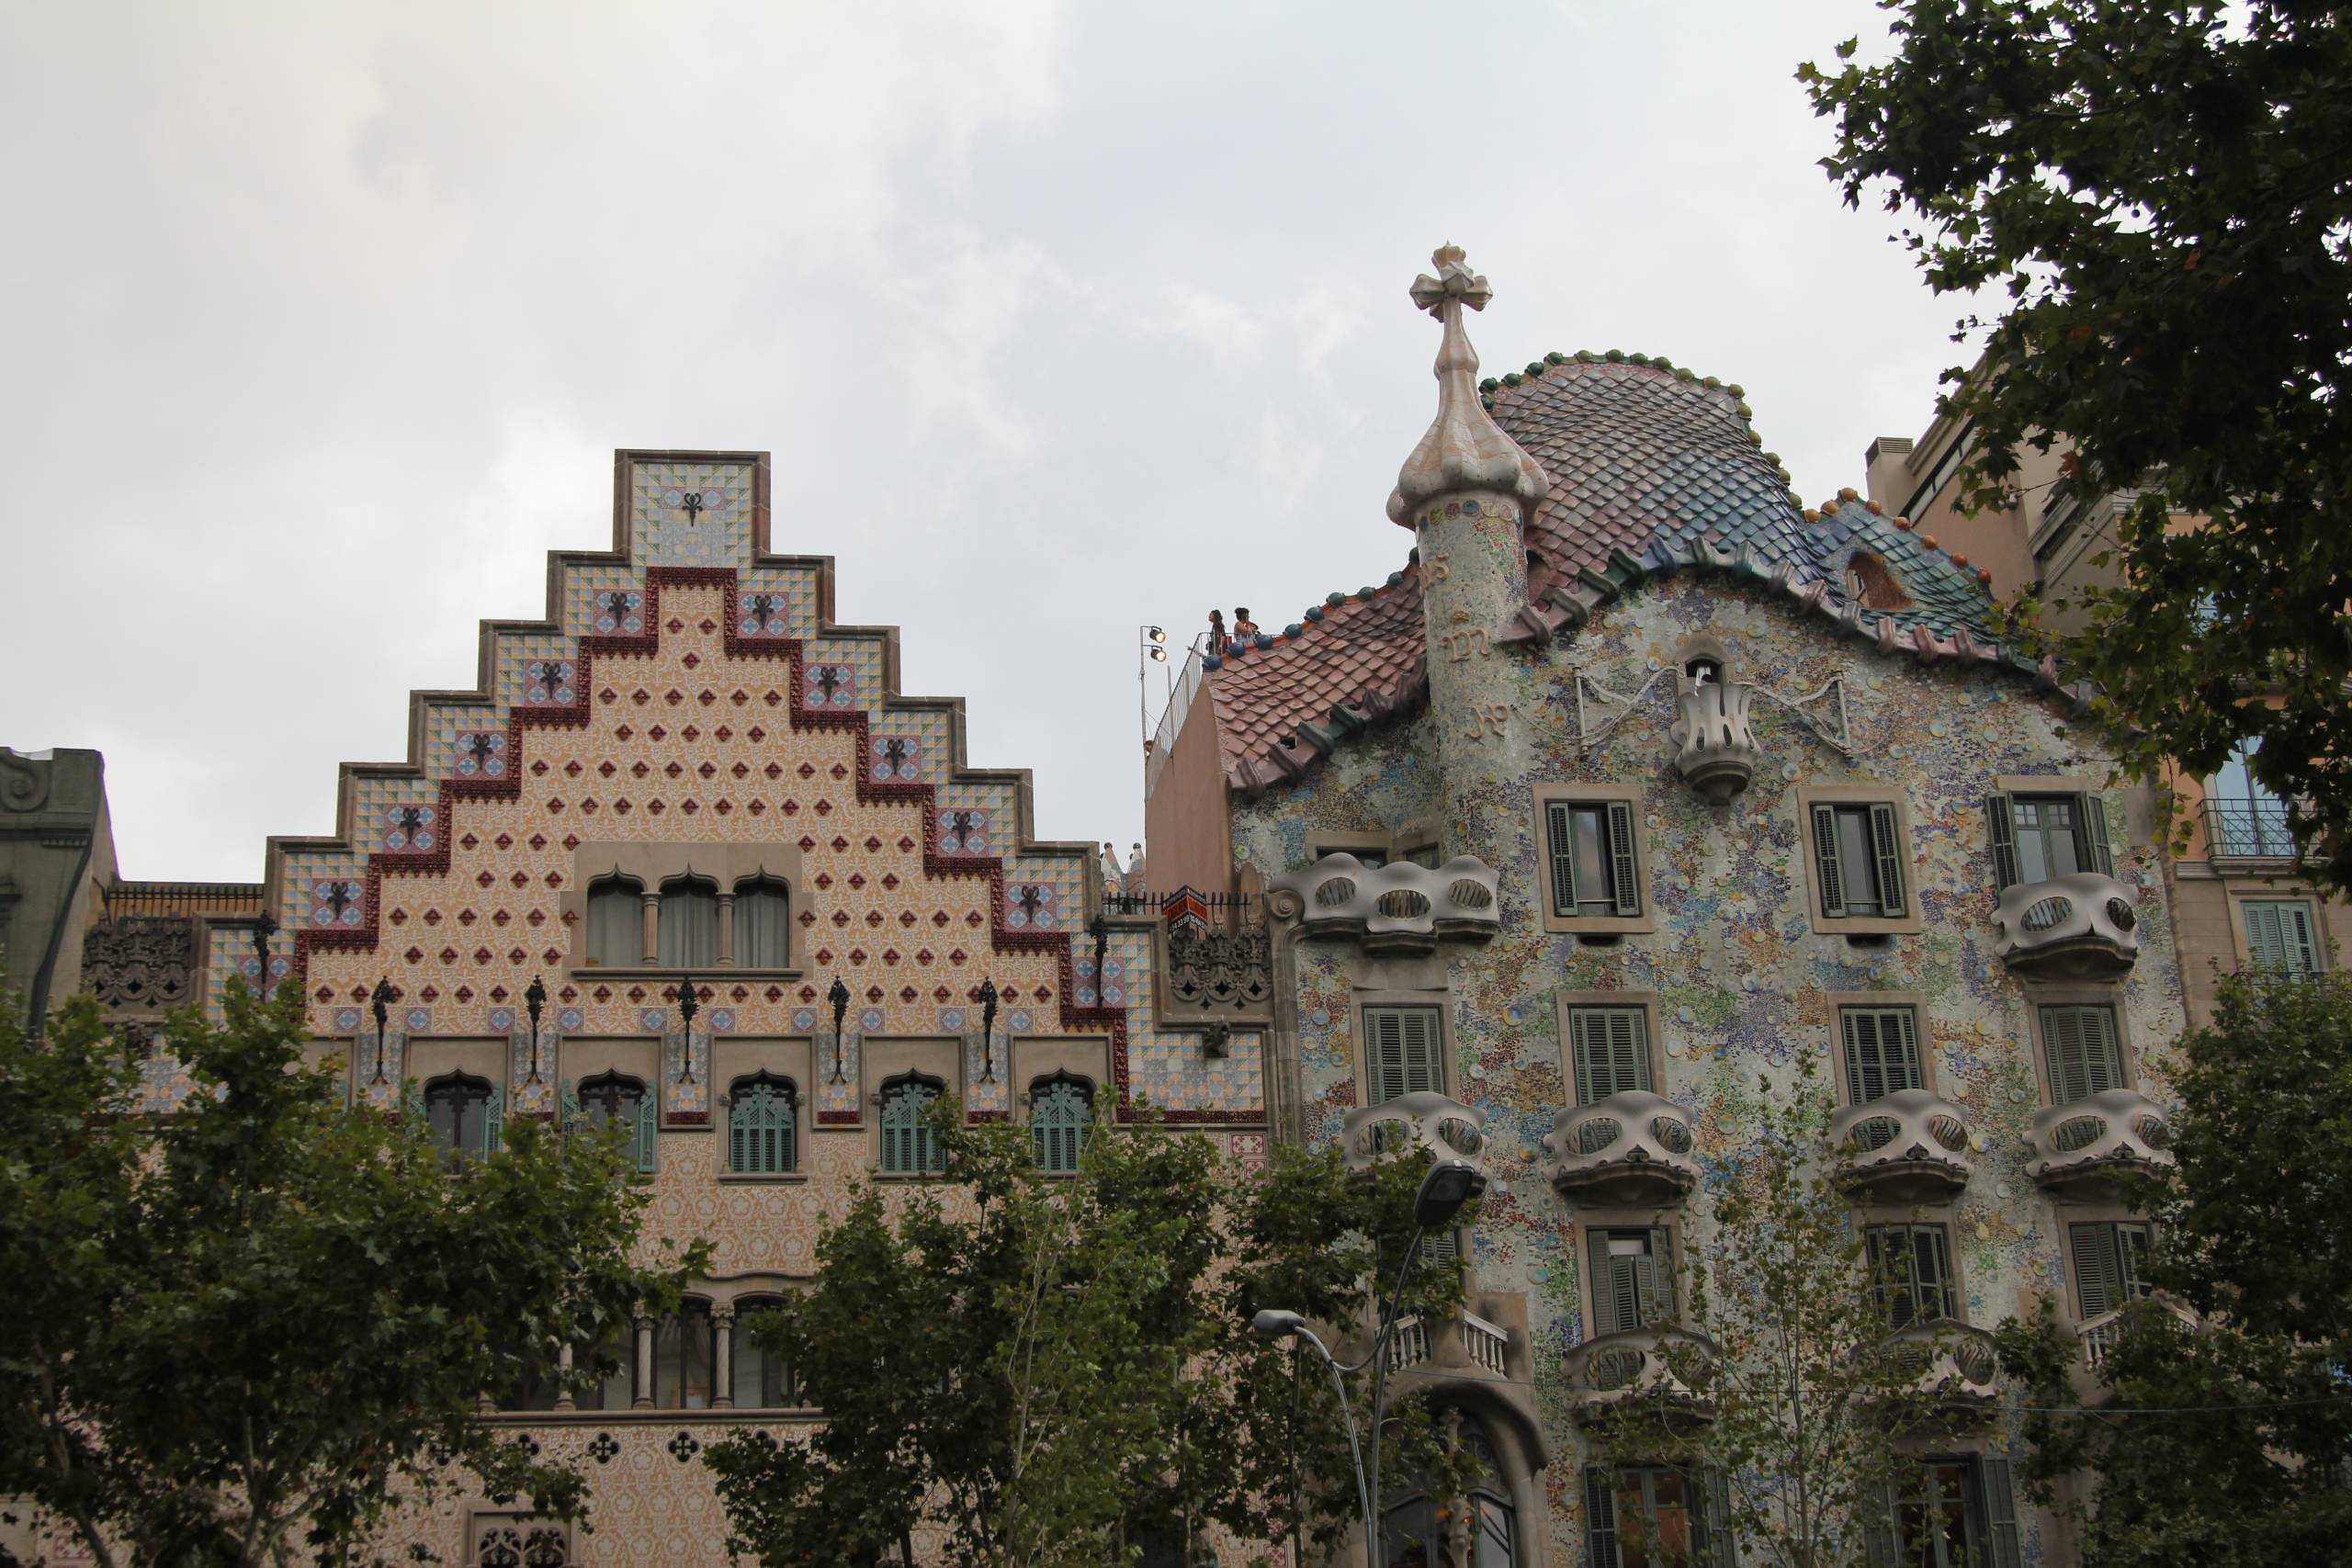 Casa Milà and Casa Amatller: Two of Barcelona's Finest Modernist Buildings